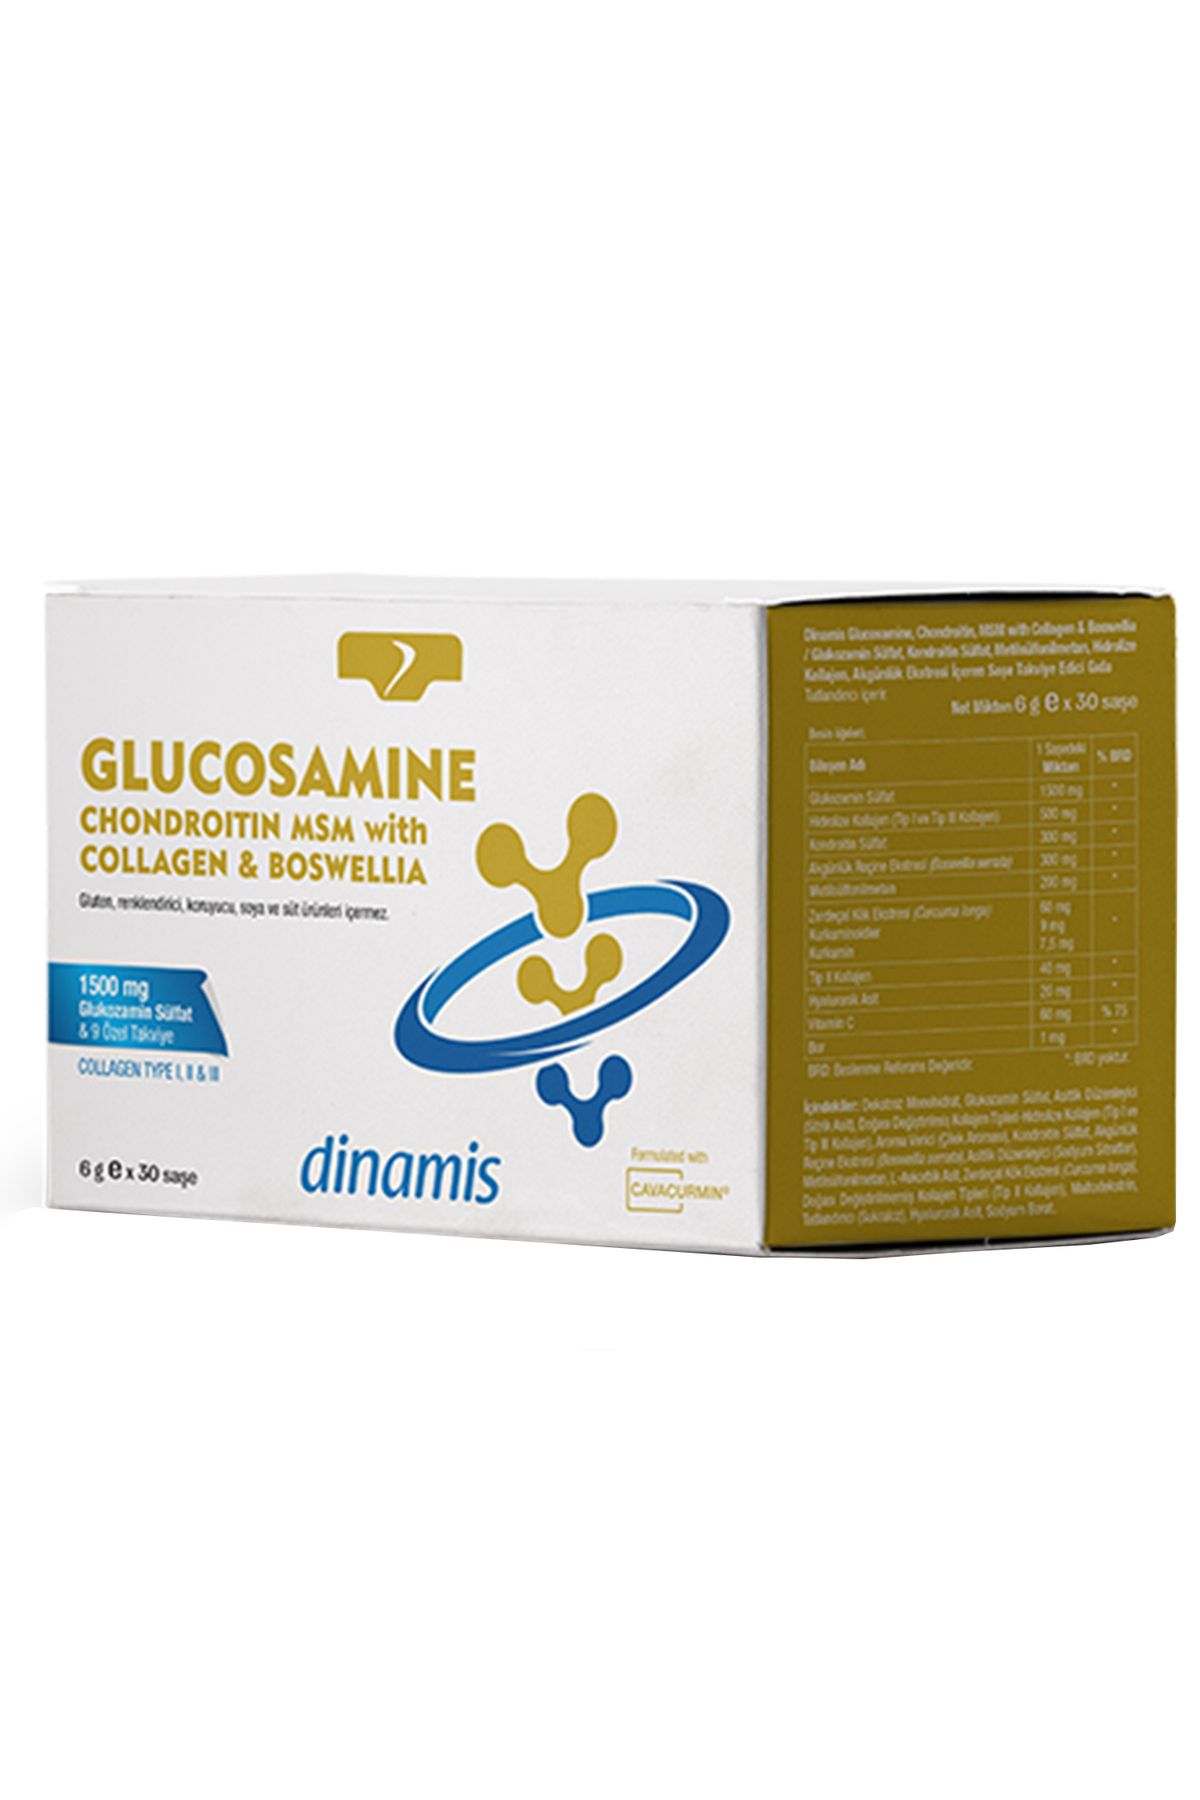 DİNAMİS Dinamis Glucosamine Chondroitin Msm With Collagen & Boswellia 6 gr X 30 Şase